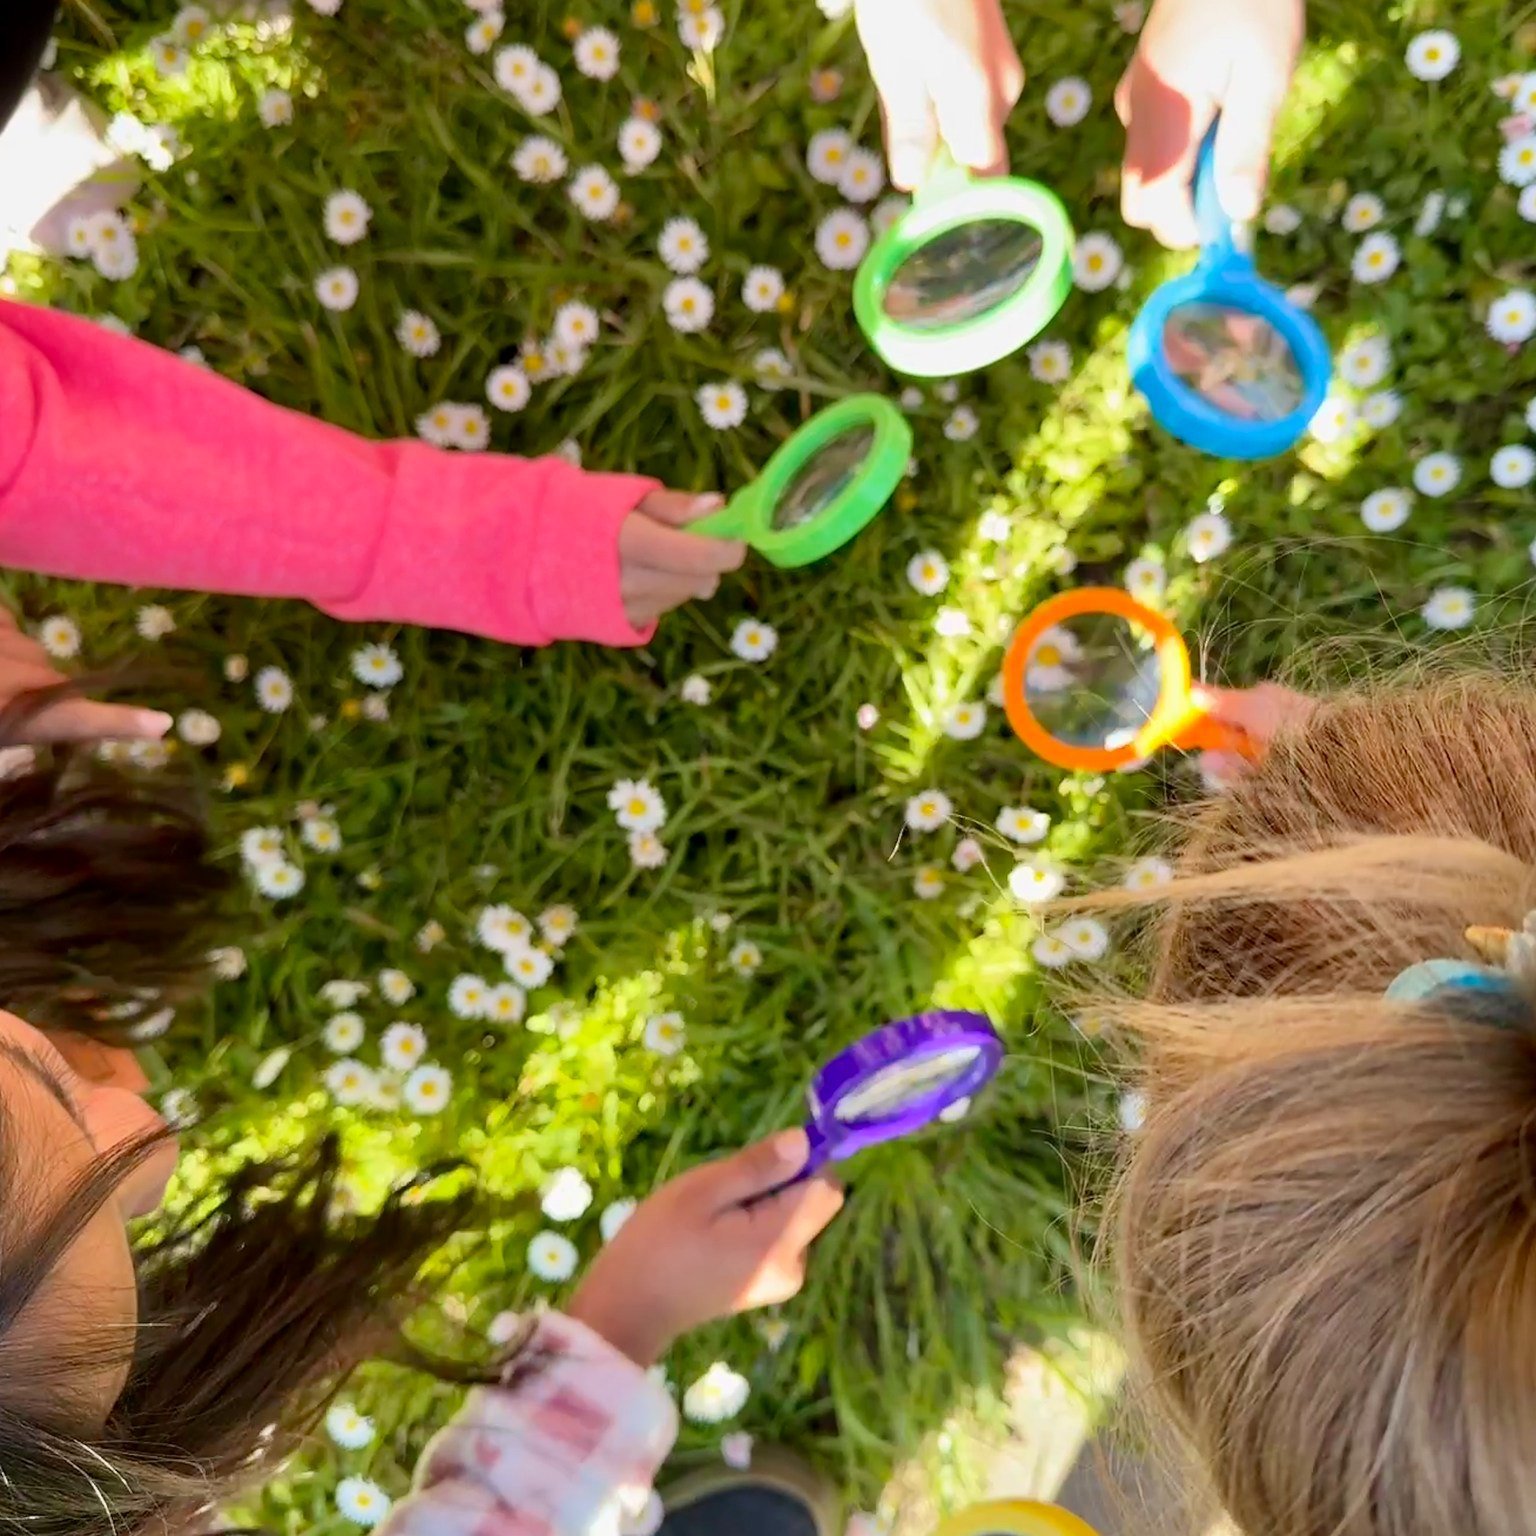 In their outdoor classroom, students at The HEAL Project find a flowering plant and use a magnifying glass to view the pollen and get a closer look at all the plant parts. They observe the flowers closely, noting characteristics that may attract poll